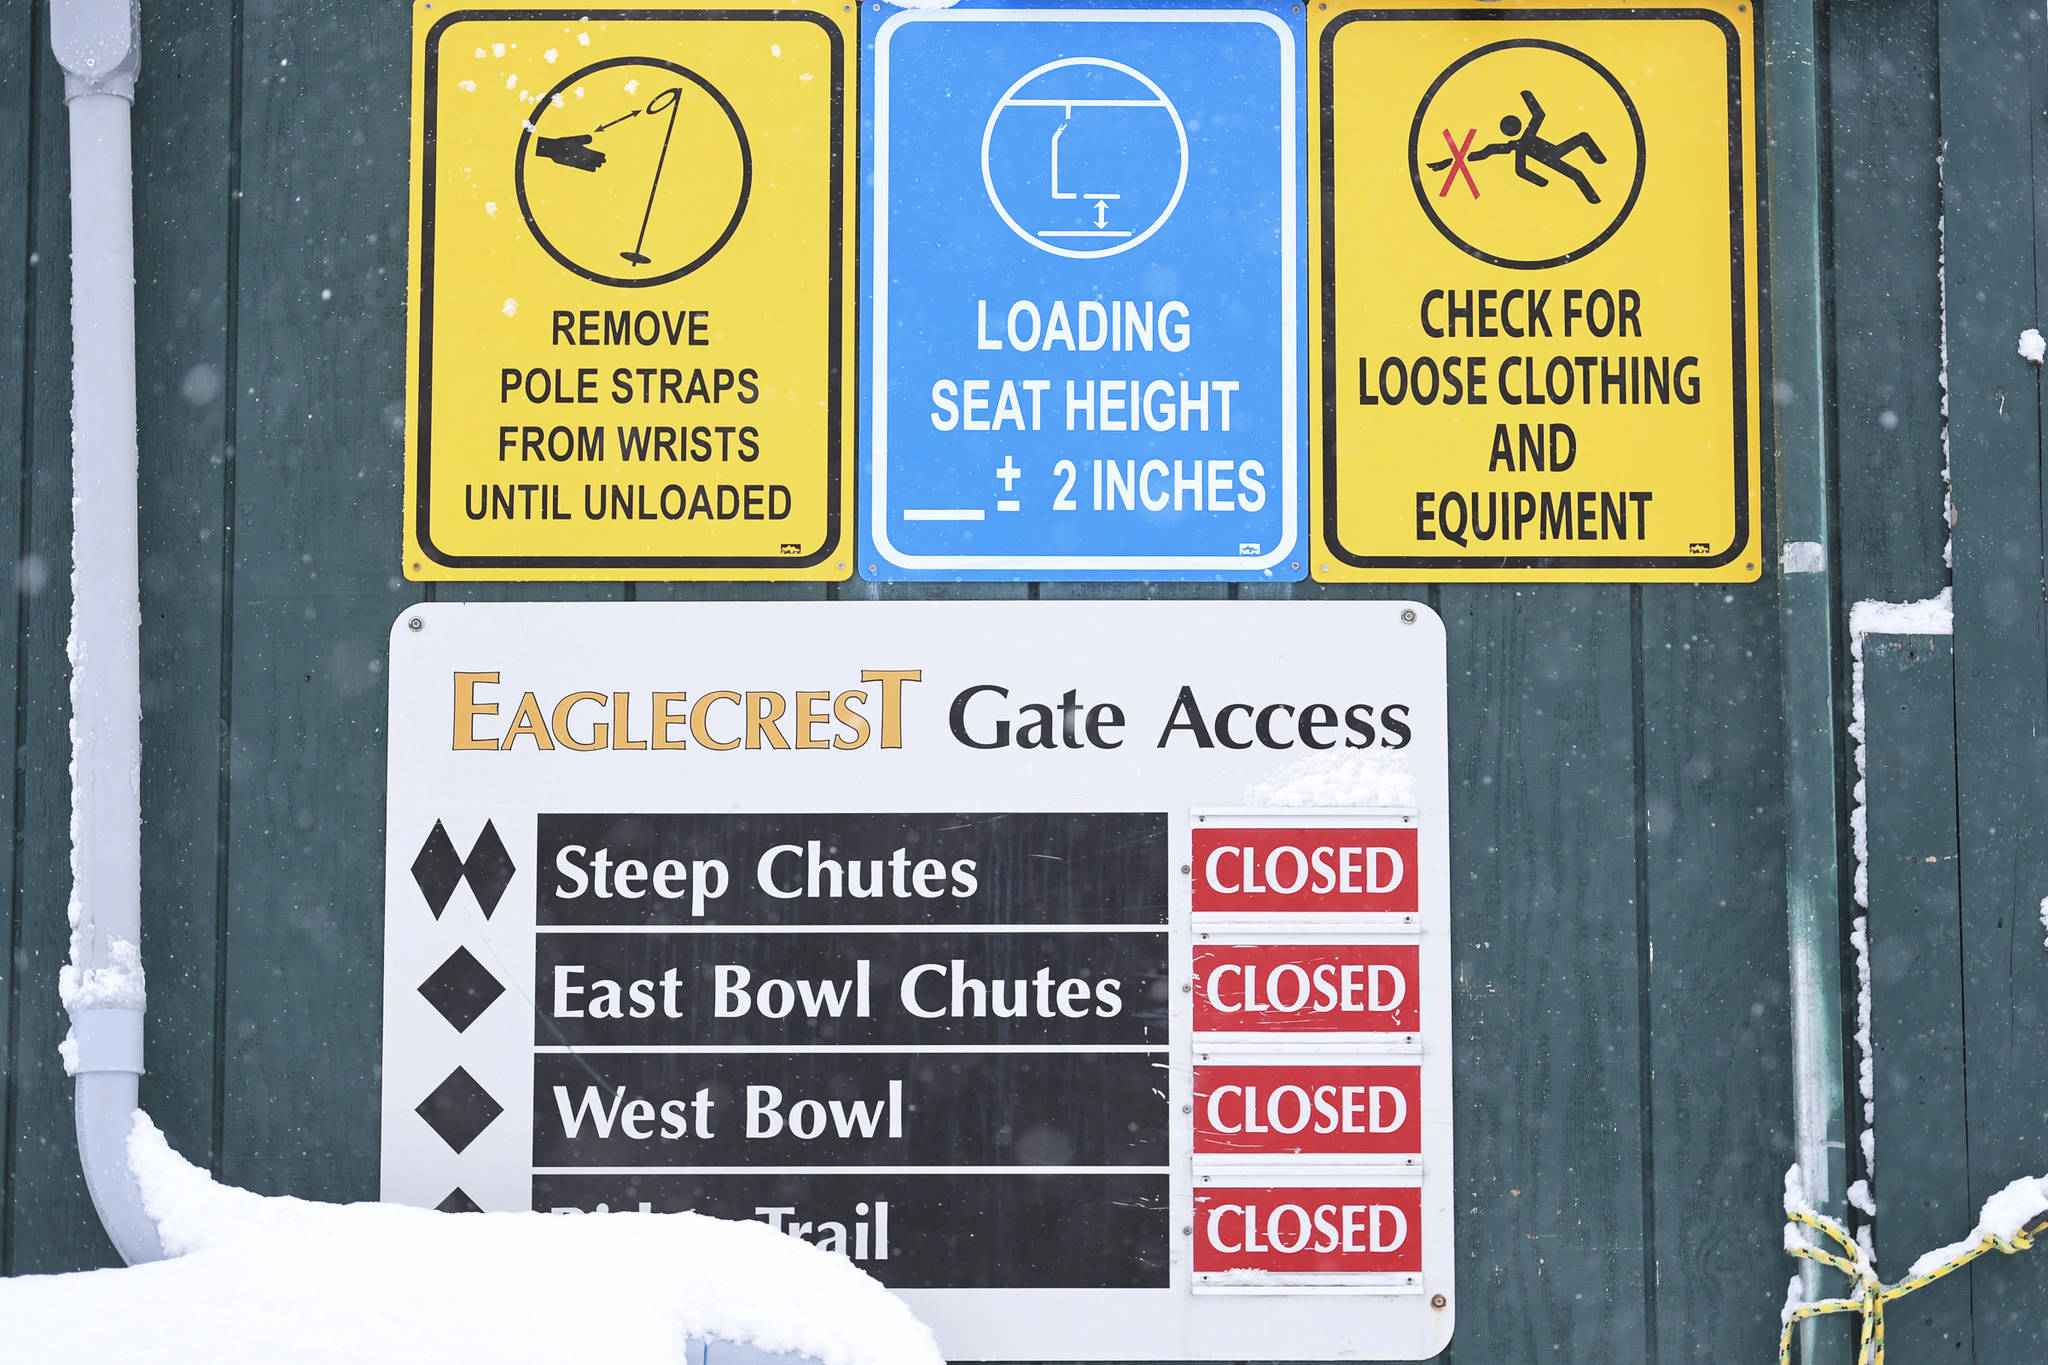 Snow and signs at the base of the Ptarmigan Chairlift on Tuesday, Dec. 3, 2019. (Michael Penn | Juneau Empire)